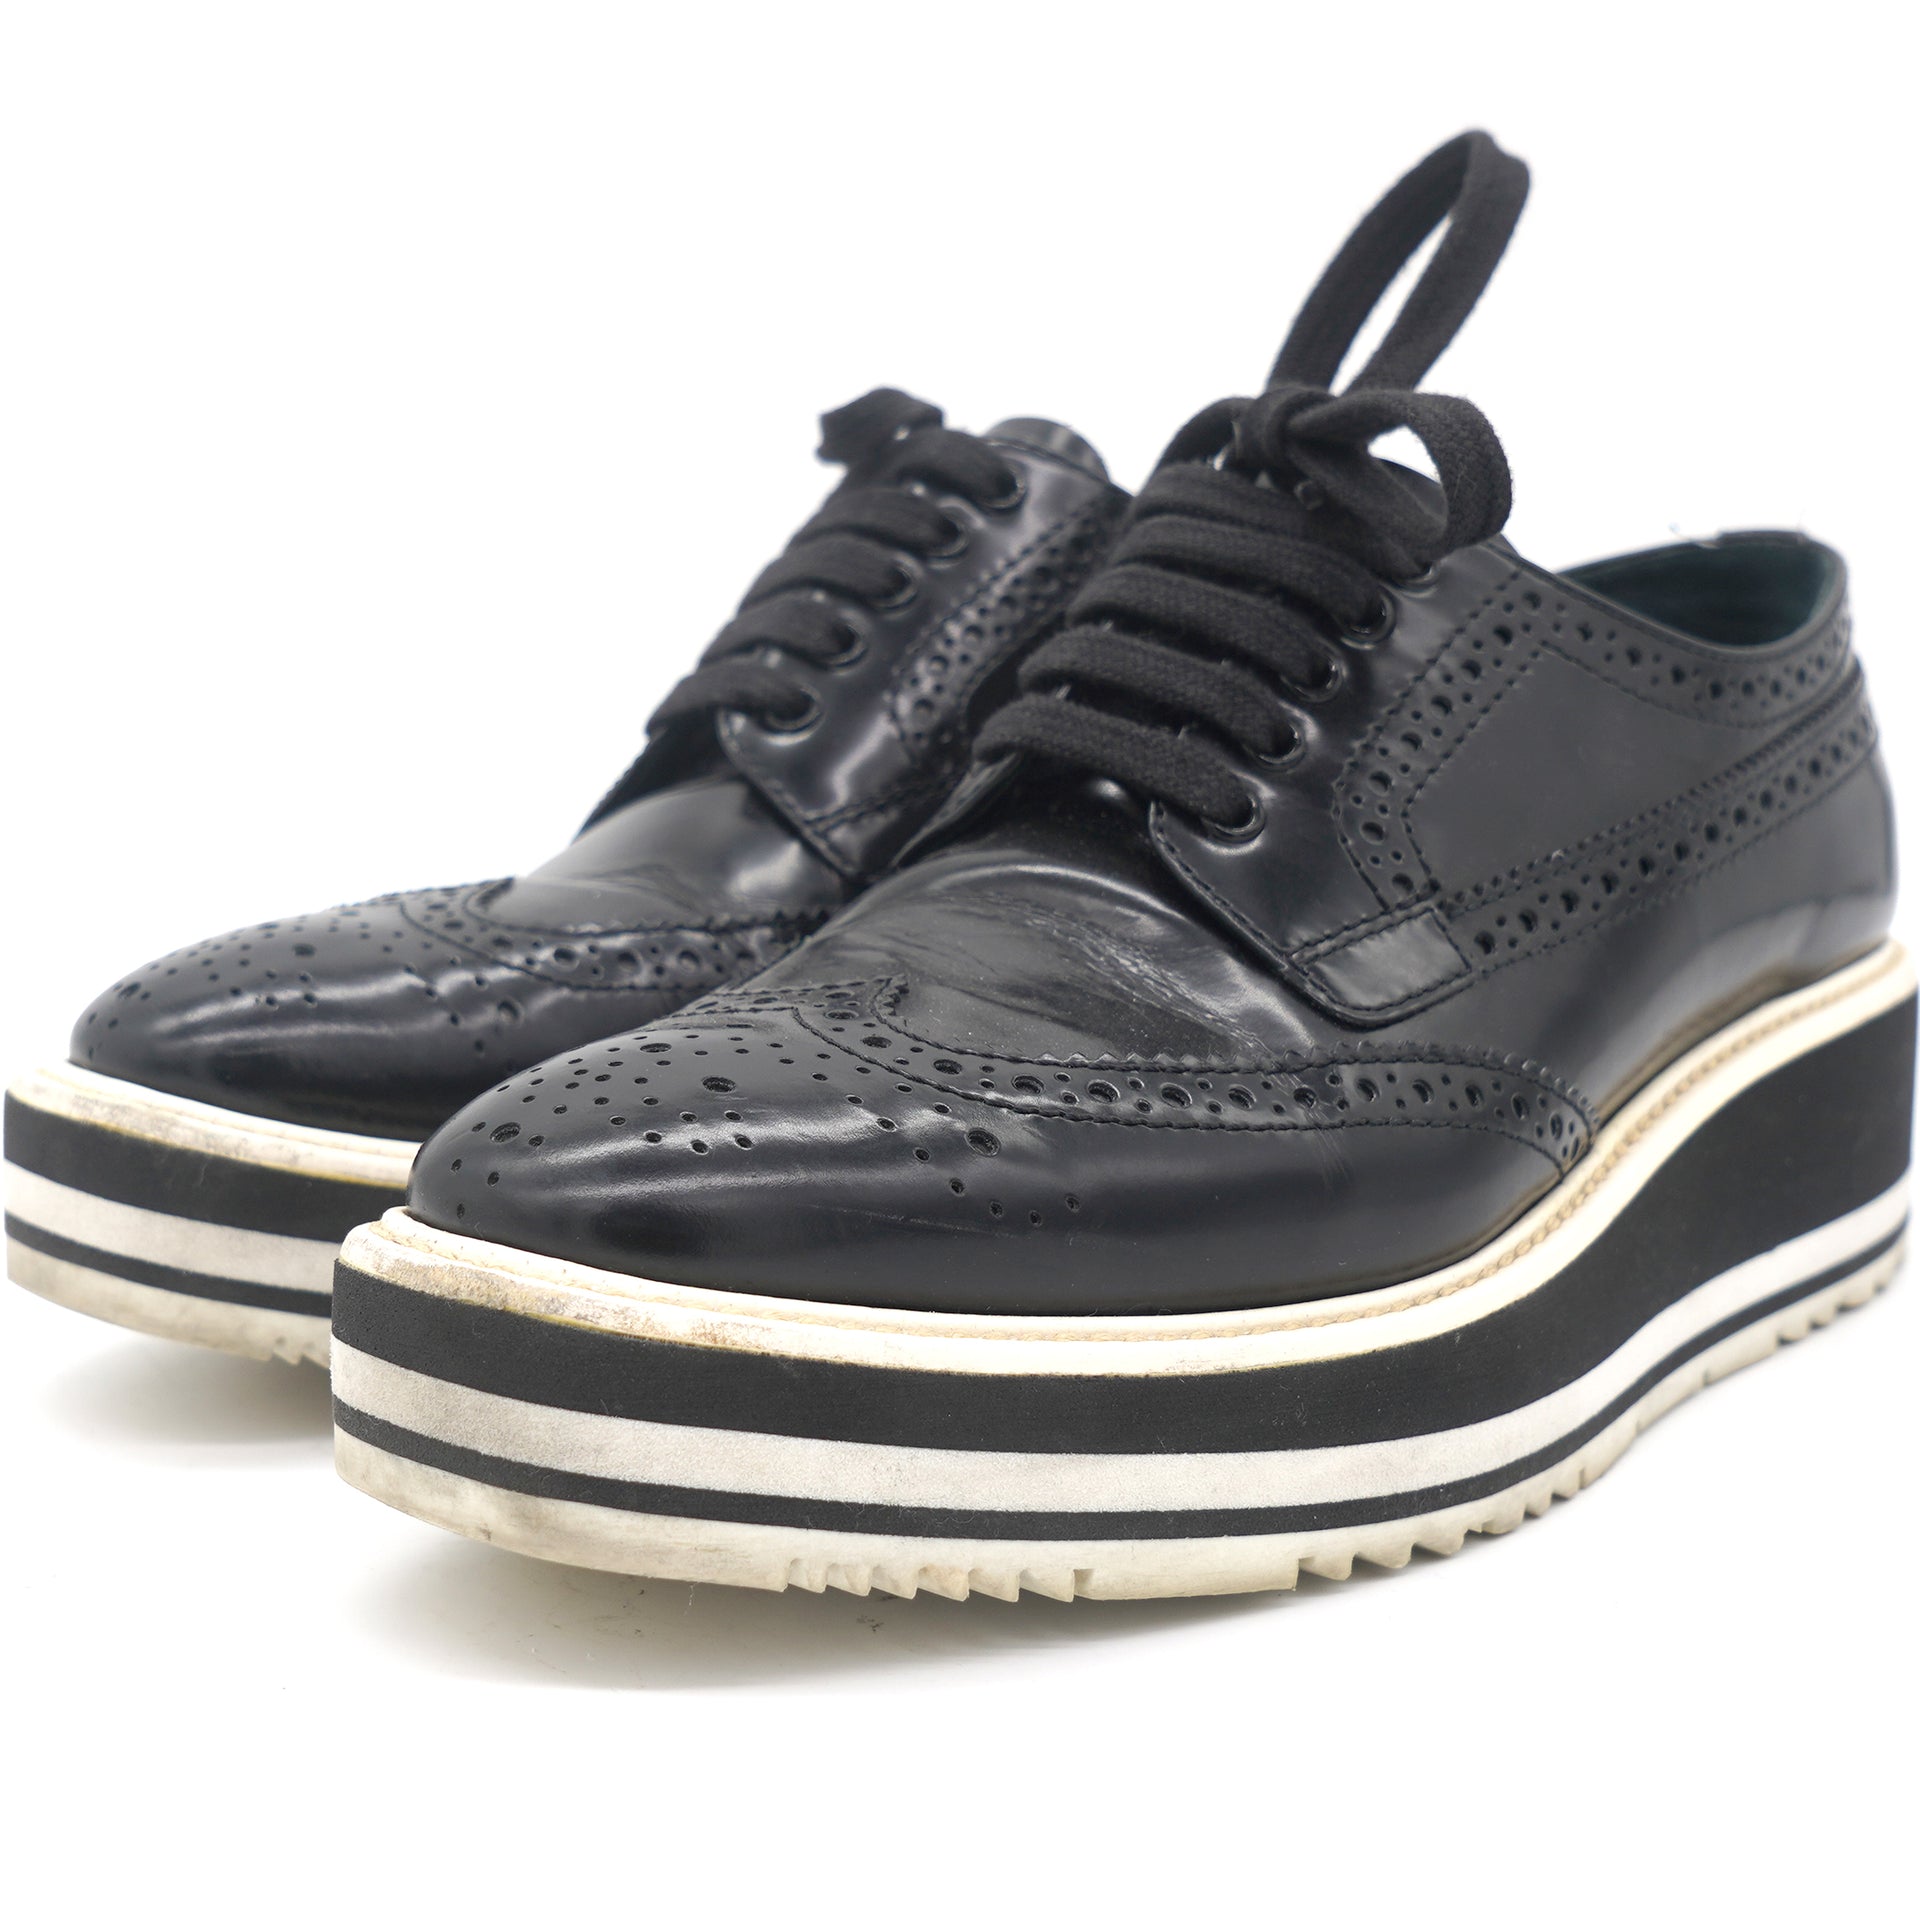 Black Leather Lace-Up Derby Shoes 35.5